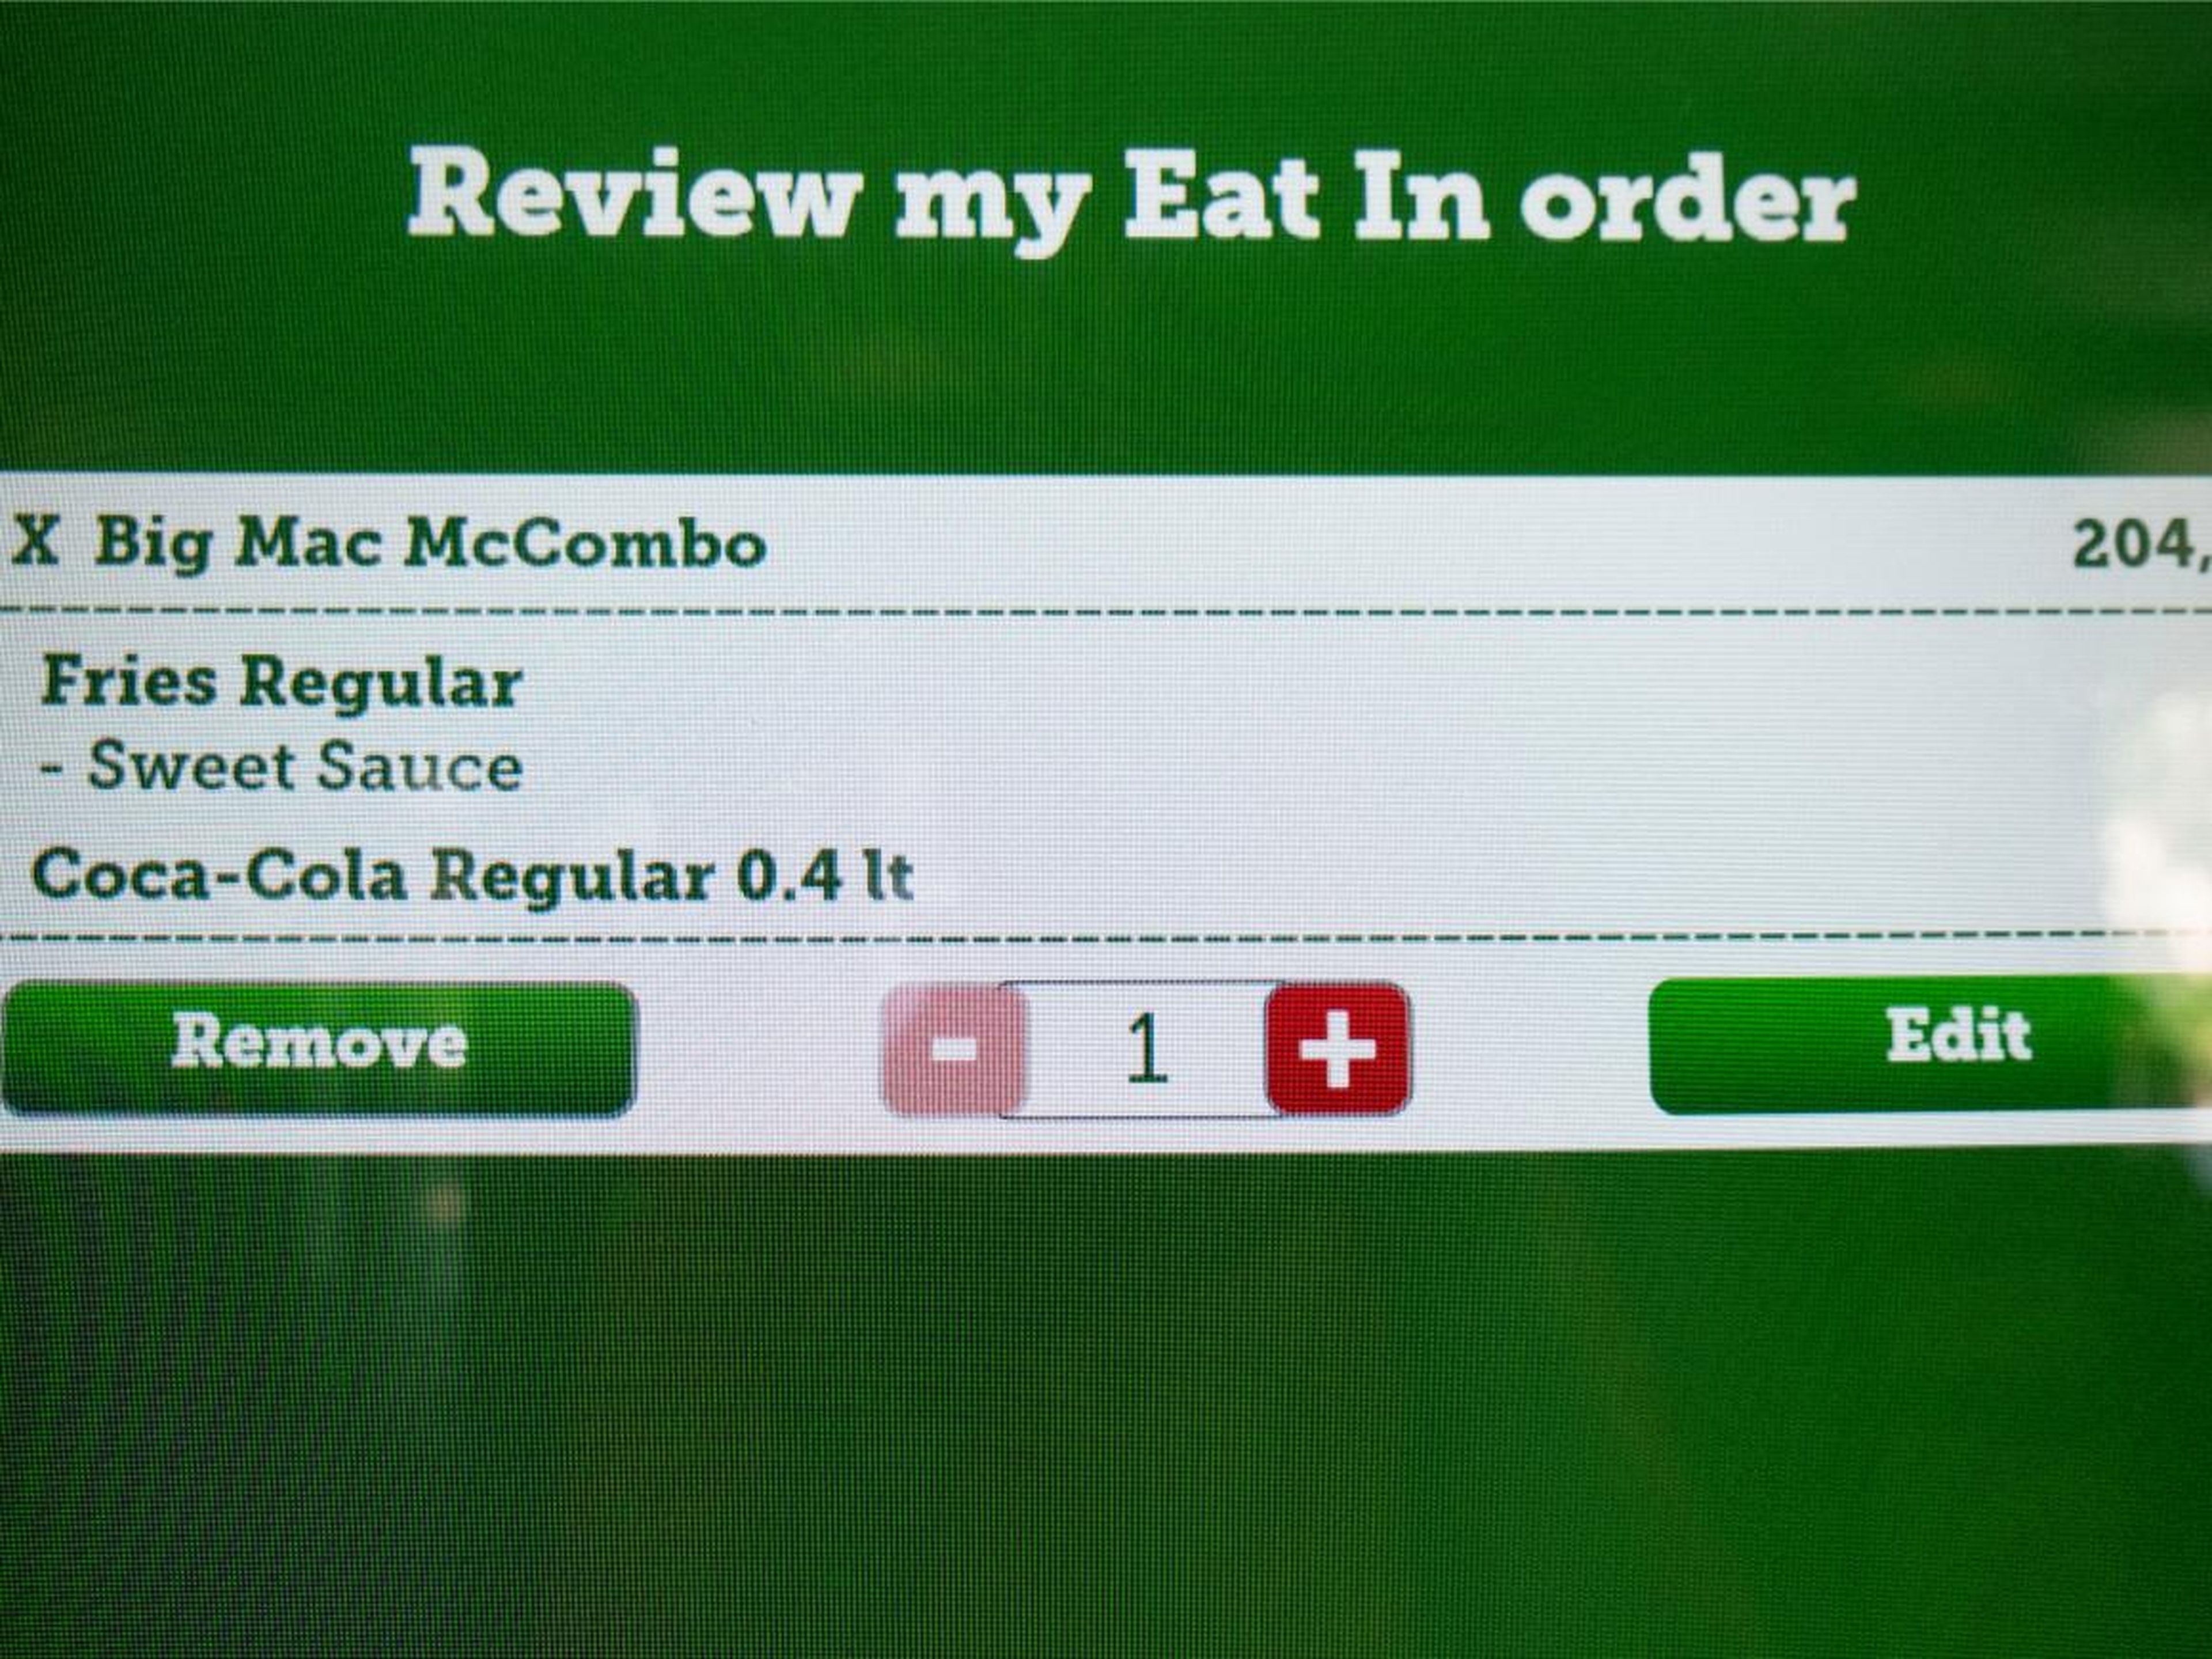 I reviewed my order: a Big Mac McCombo, fries with sweet sauce (I'm not a fan of Ketchup), and a Coke. The total came out to 204 rubles, or about $3.22.